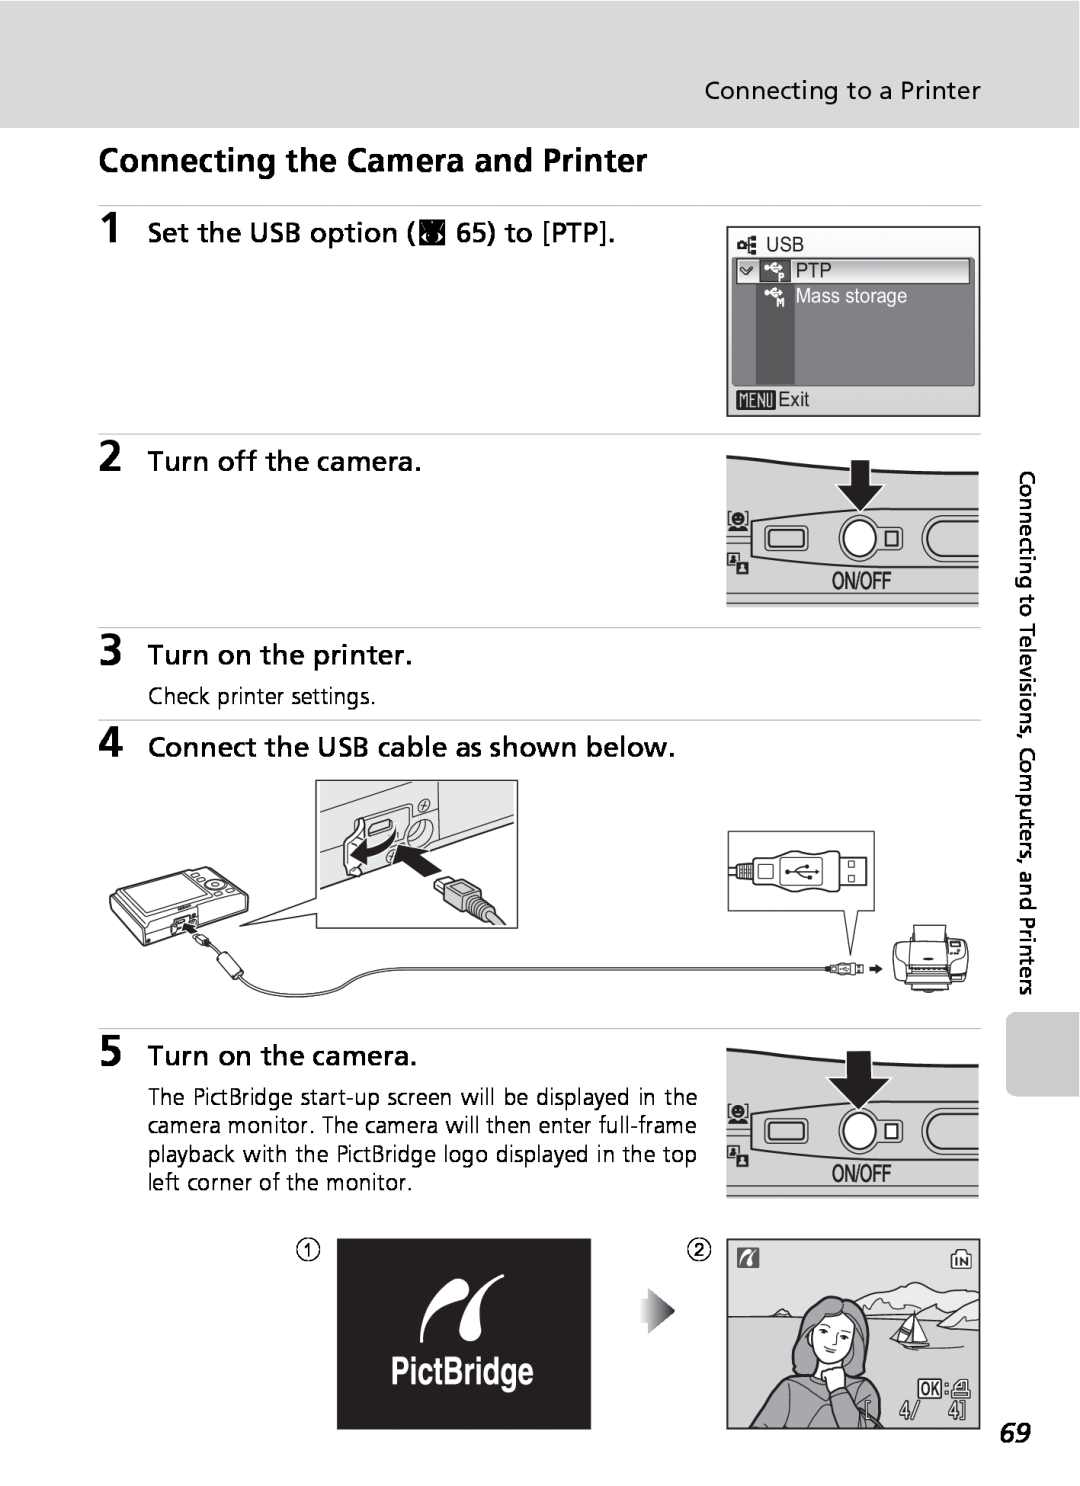 Nikon COOLPIXS9 Connecting the Camera and Printer, Set the USB option c 65 to PTP, Turn off the camera, Turn on the camera 